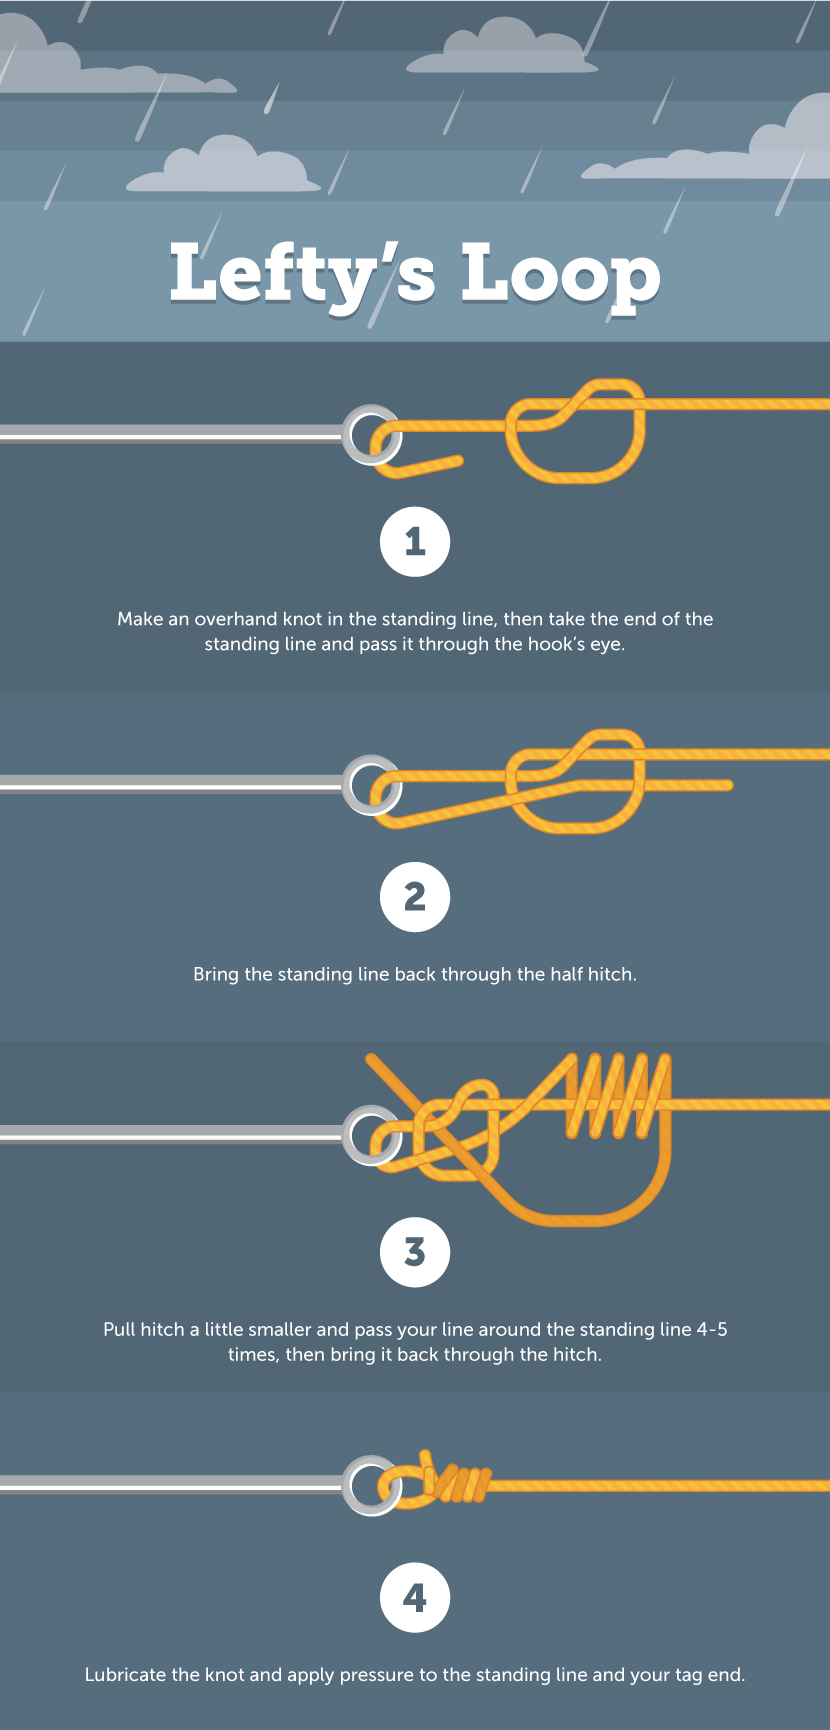 Top 5 Fishing Knots You Need to Know